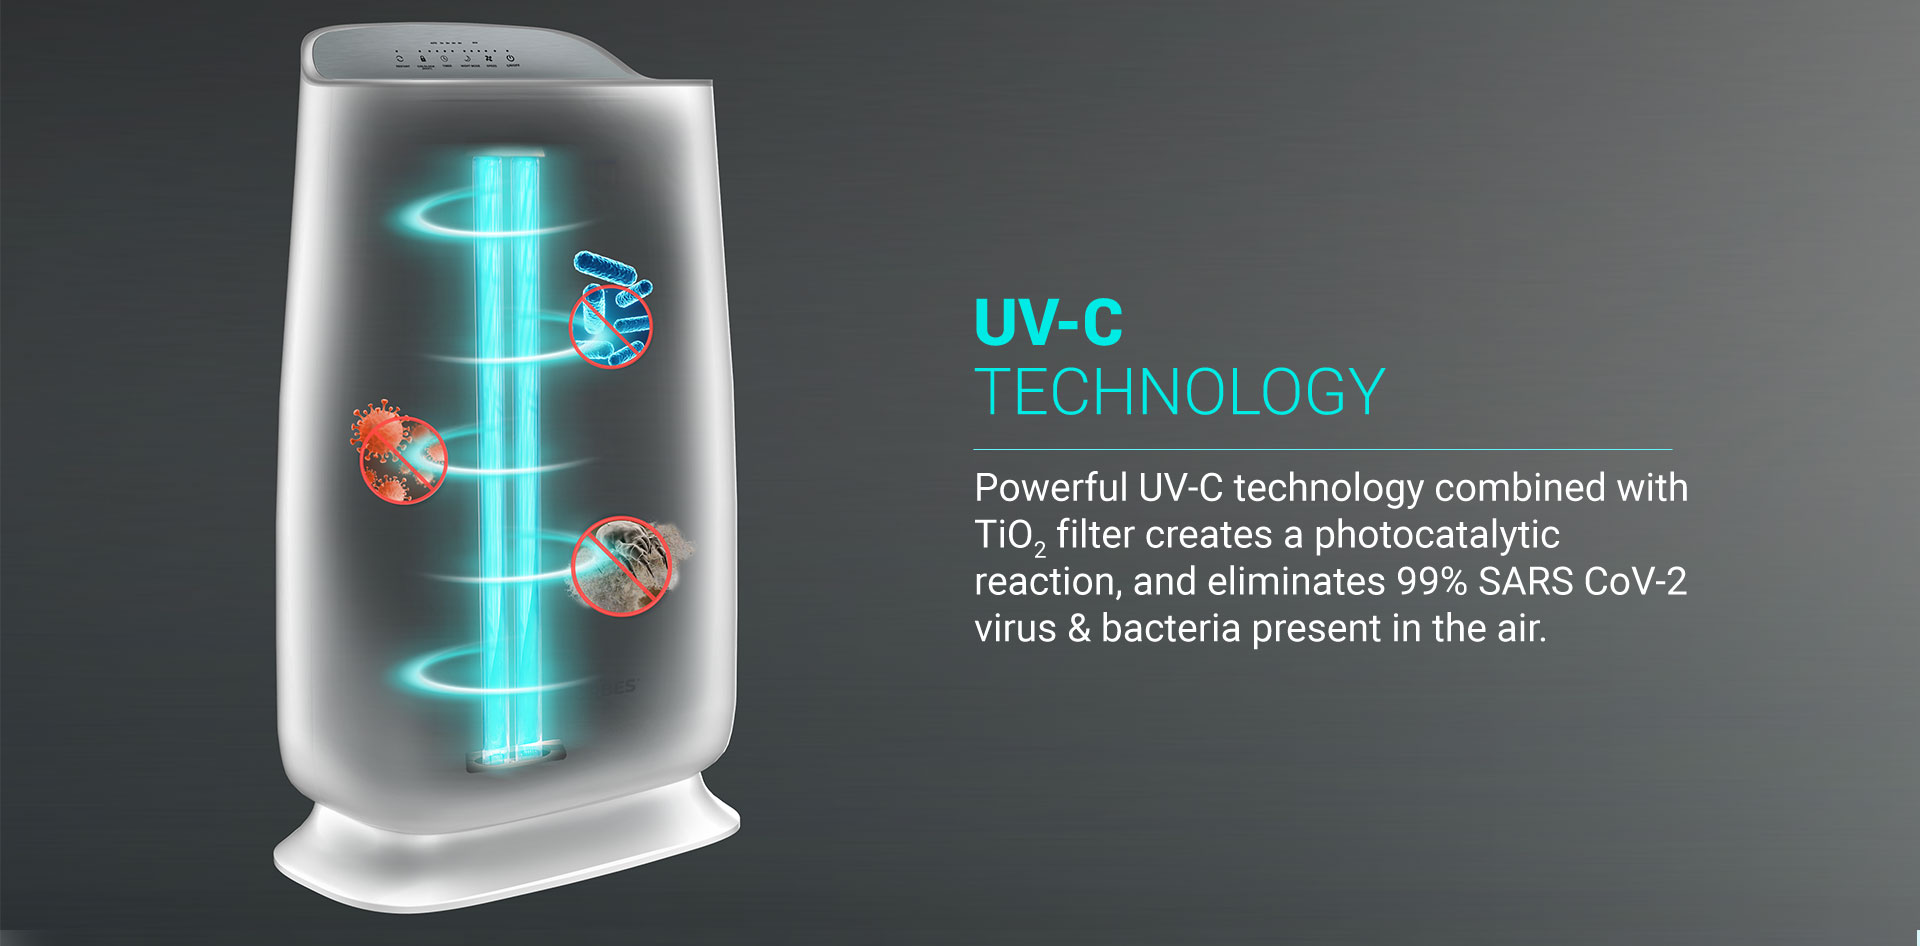 Powerful UV-C technology combined with TiO2 filter creates a photocatalytic reaction, and eliminates 99% SARS CoV-2 virus & bacteria present in the air.